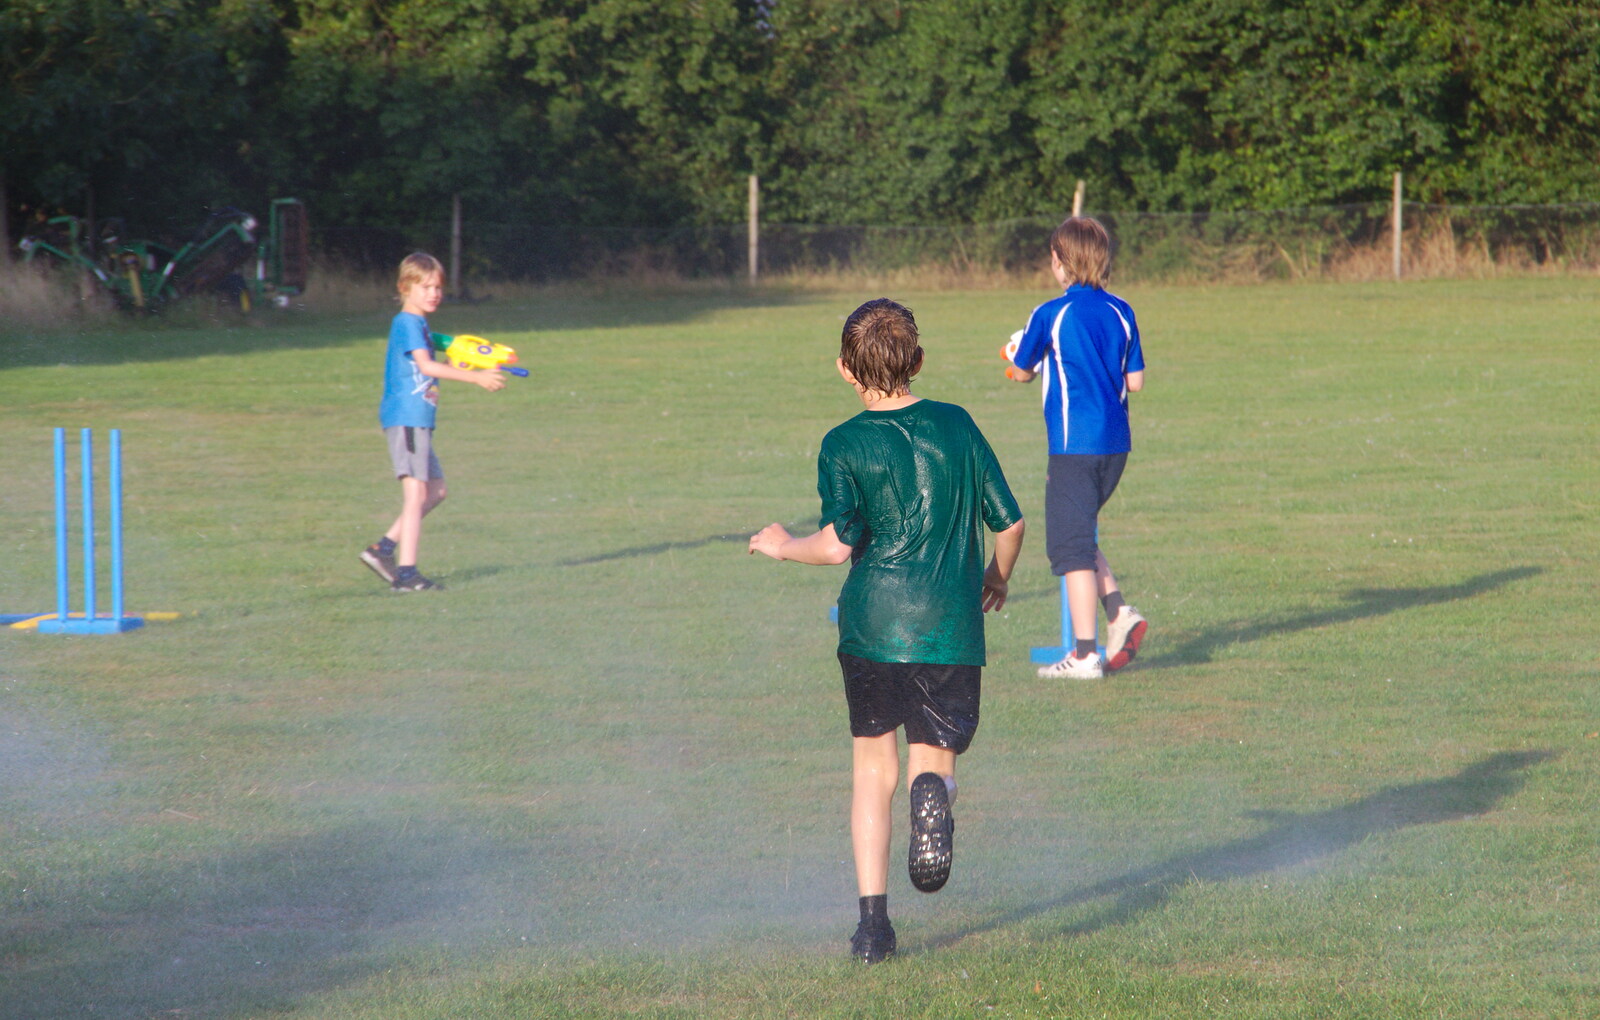 Harry, Fred and Oak are properly wet from A Water Fight with a Fire Engine, Eye Cricket Club, Suffolk - 5th August 2019